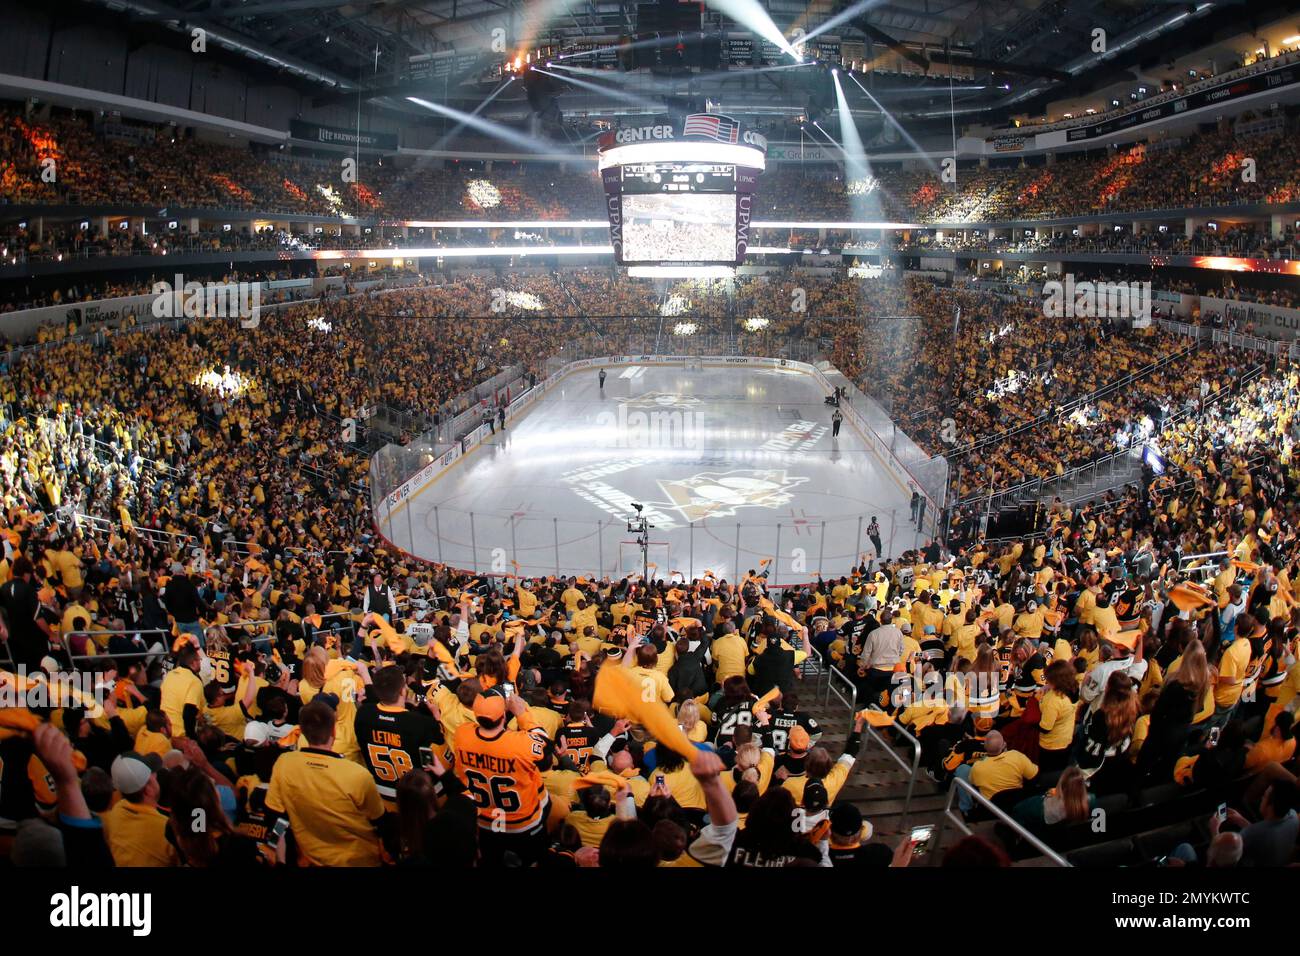 The crowd waves towels and cheers as lasers and spotlights swirl over the  ice at Consol Energy Center before Game 5 of the NHL hockey Stanley Cup  Eastern Conference finals between the